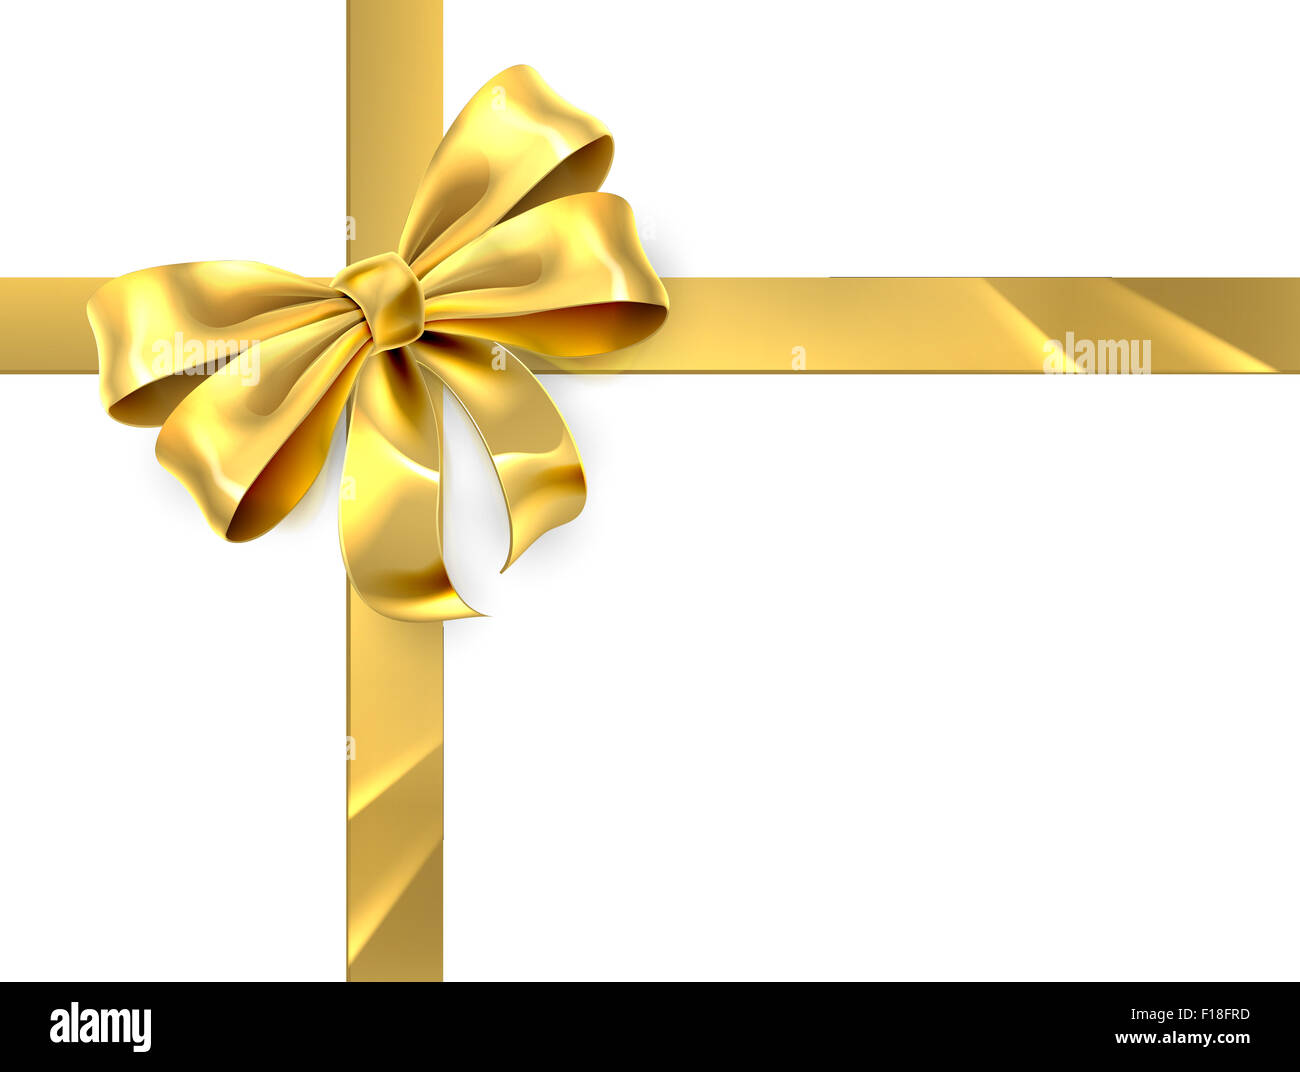 Christmas, birthday or other gift gold golden ribbon and bow wrapping background Stock Photo